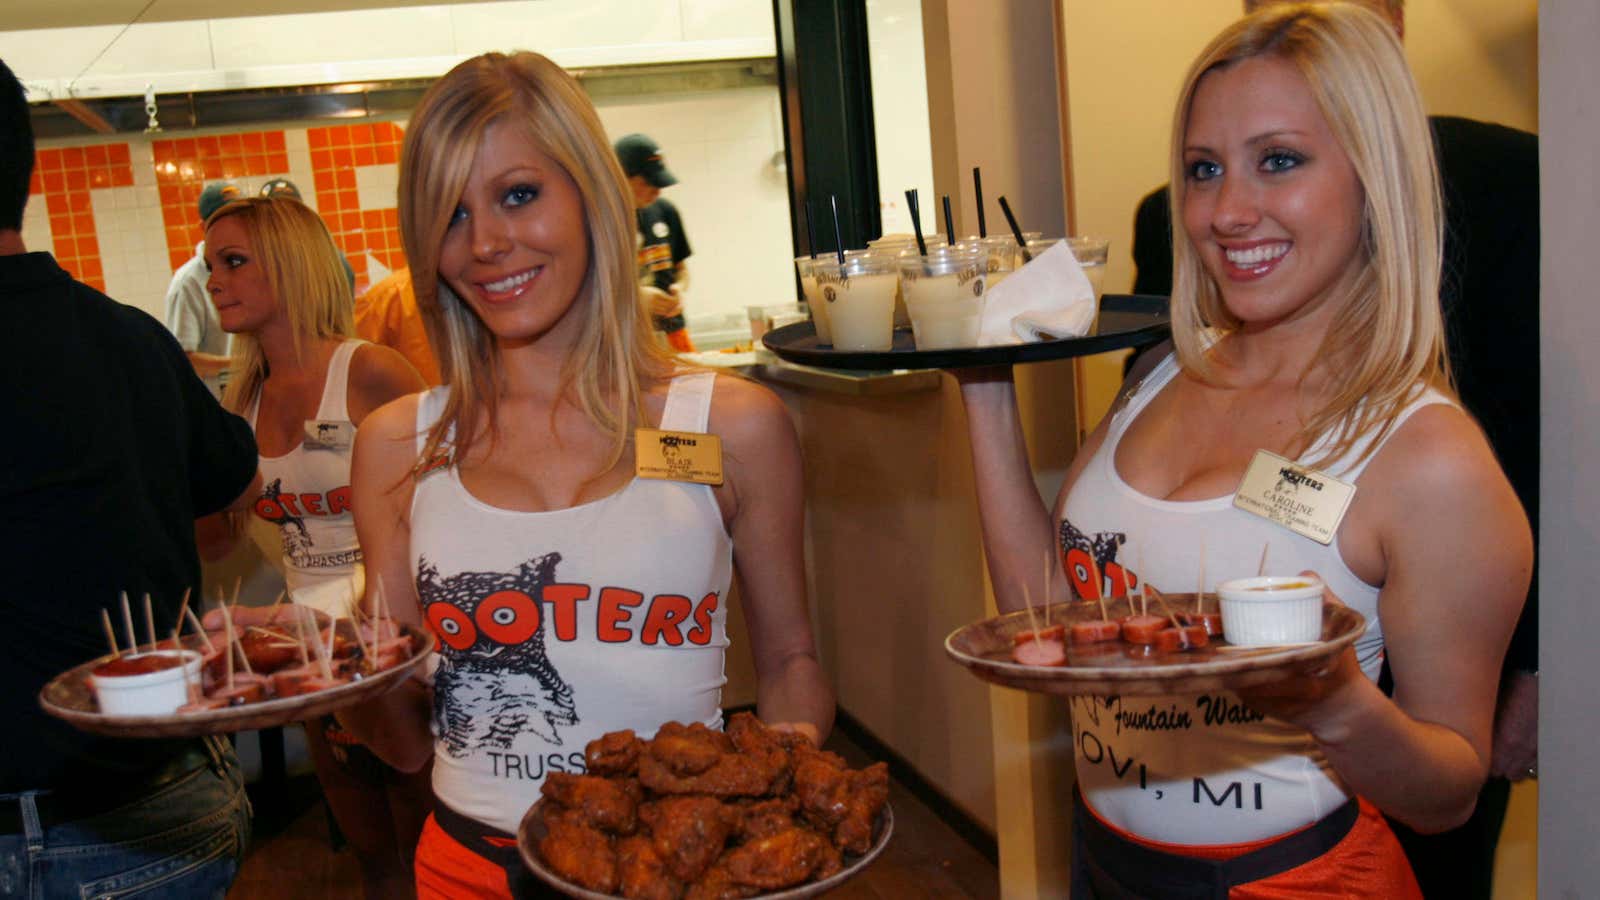 Waitresses serve food and beverages at the opening celebration of the first Israeli branch of Hooters Restaurants in Netanya, near Tel Aviv November 27, 2007.